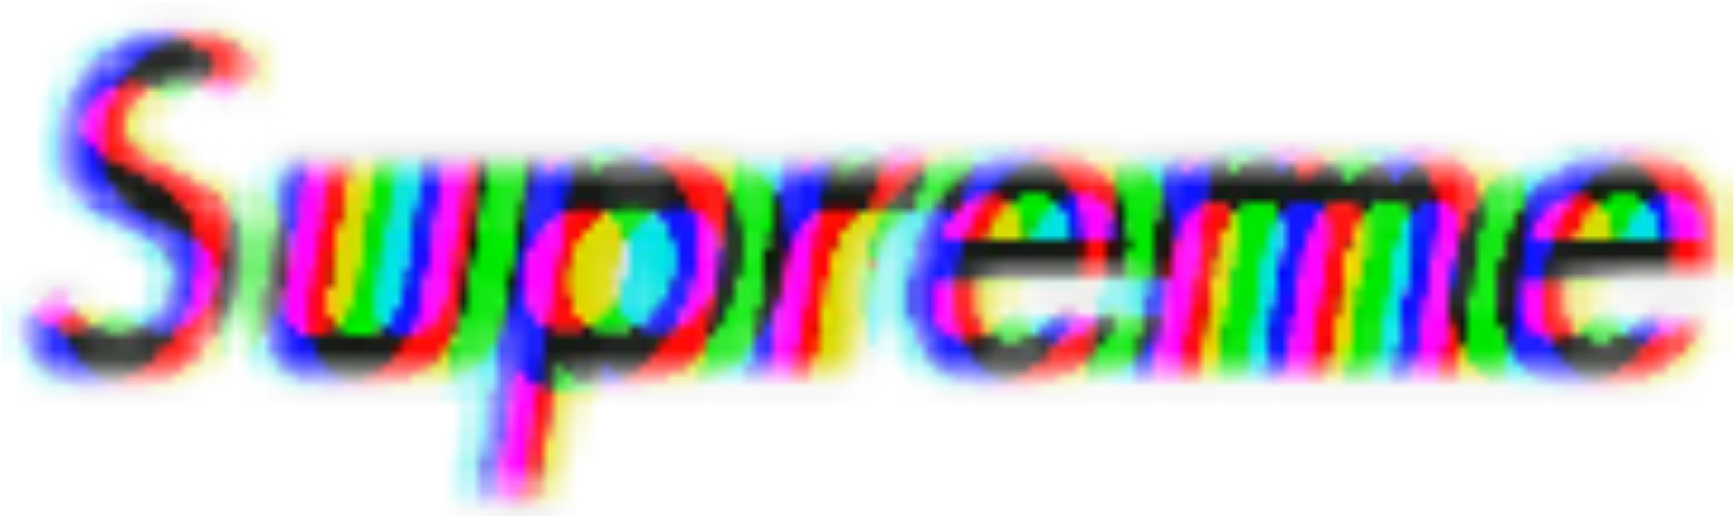 A Colorful Text On A Black Background